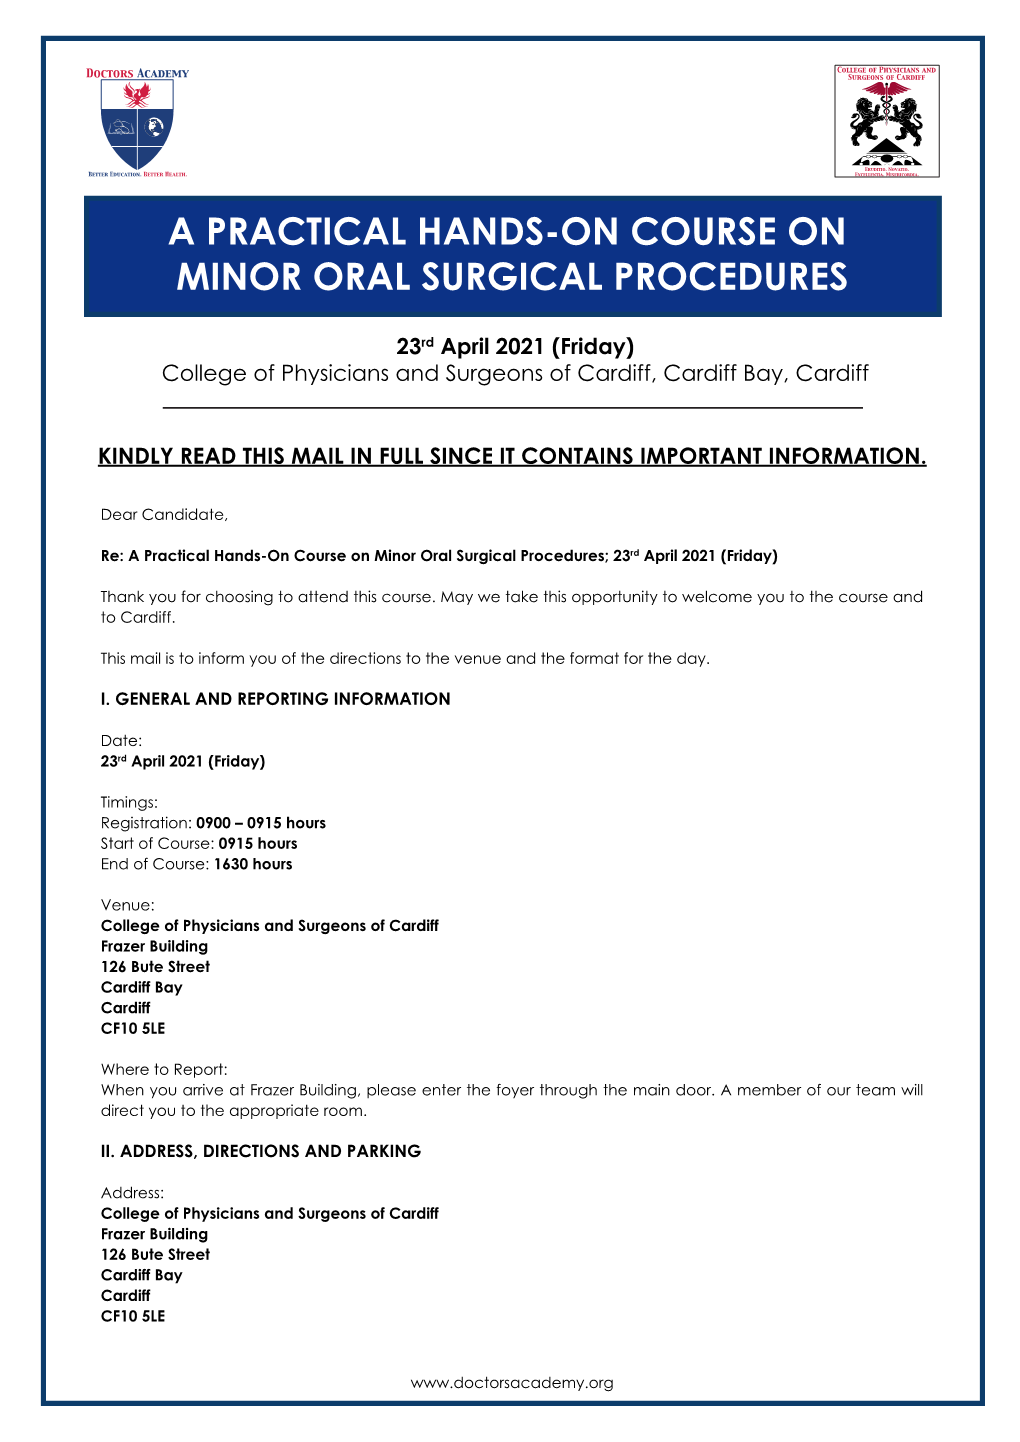 A Practical Hands-On Course on Minor Oral Surgical Procedures